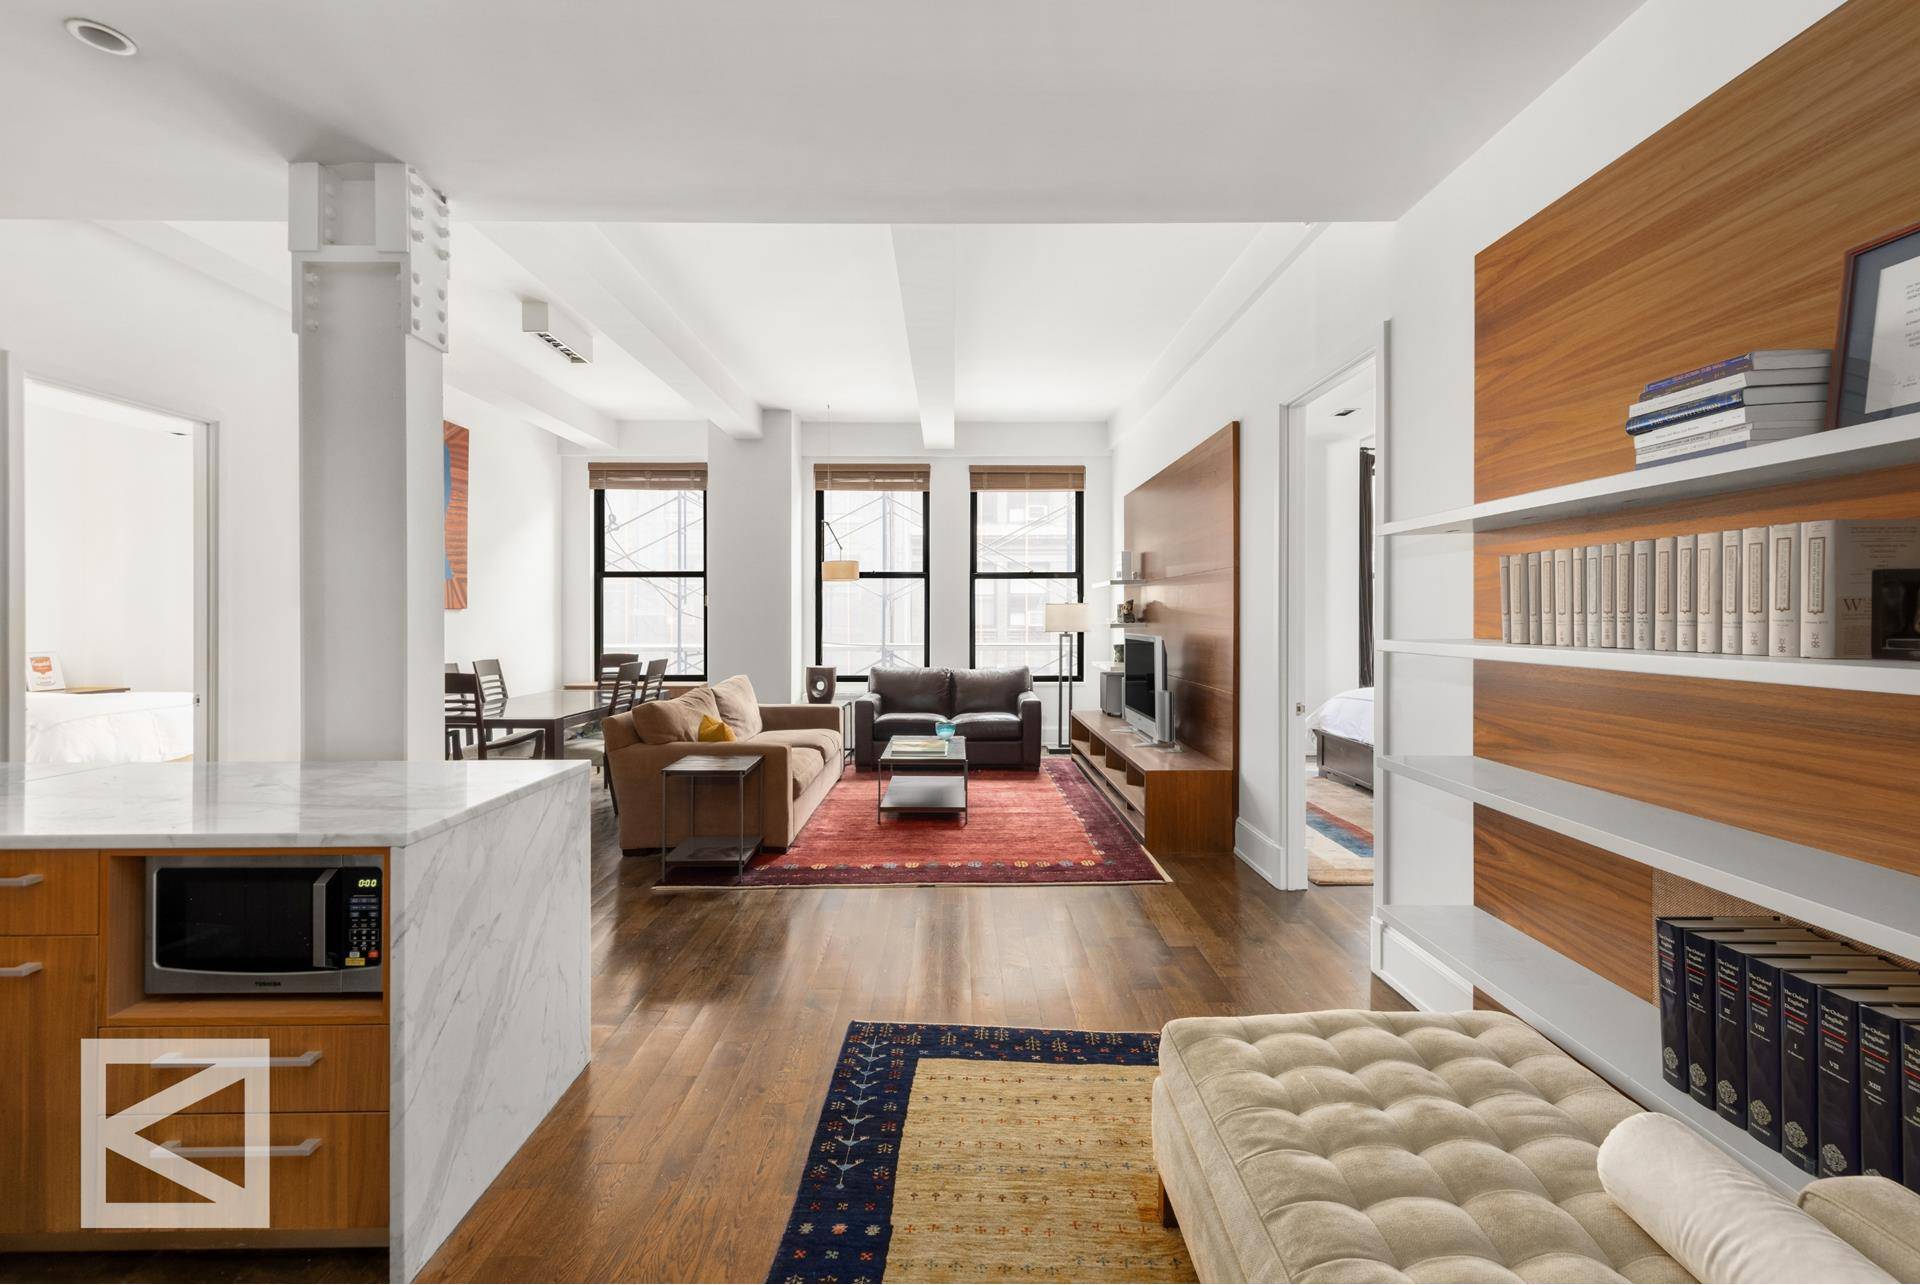 Located in the heart of gramercy, this dramatic 2 bedroom, 2 bathroom plus powder room residence is located in one of the most coveted locations of Gramercy Flatiron.